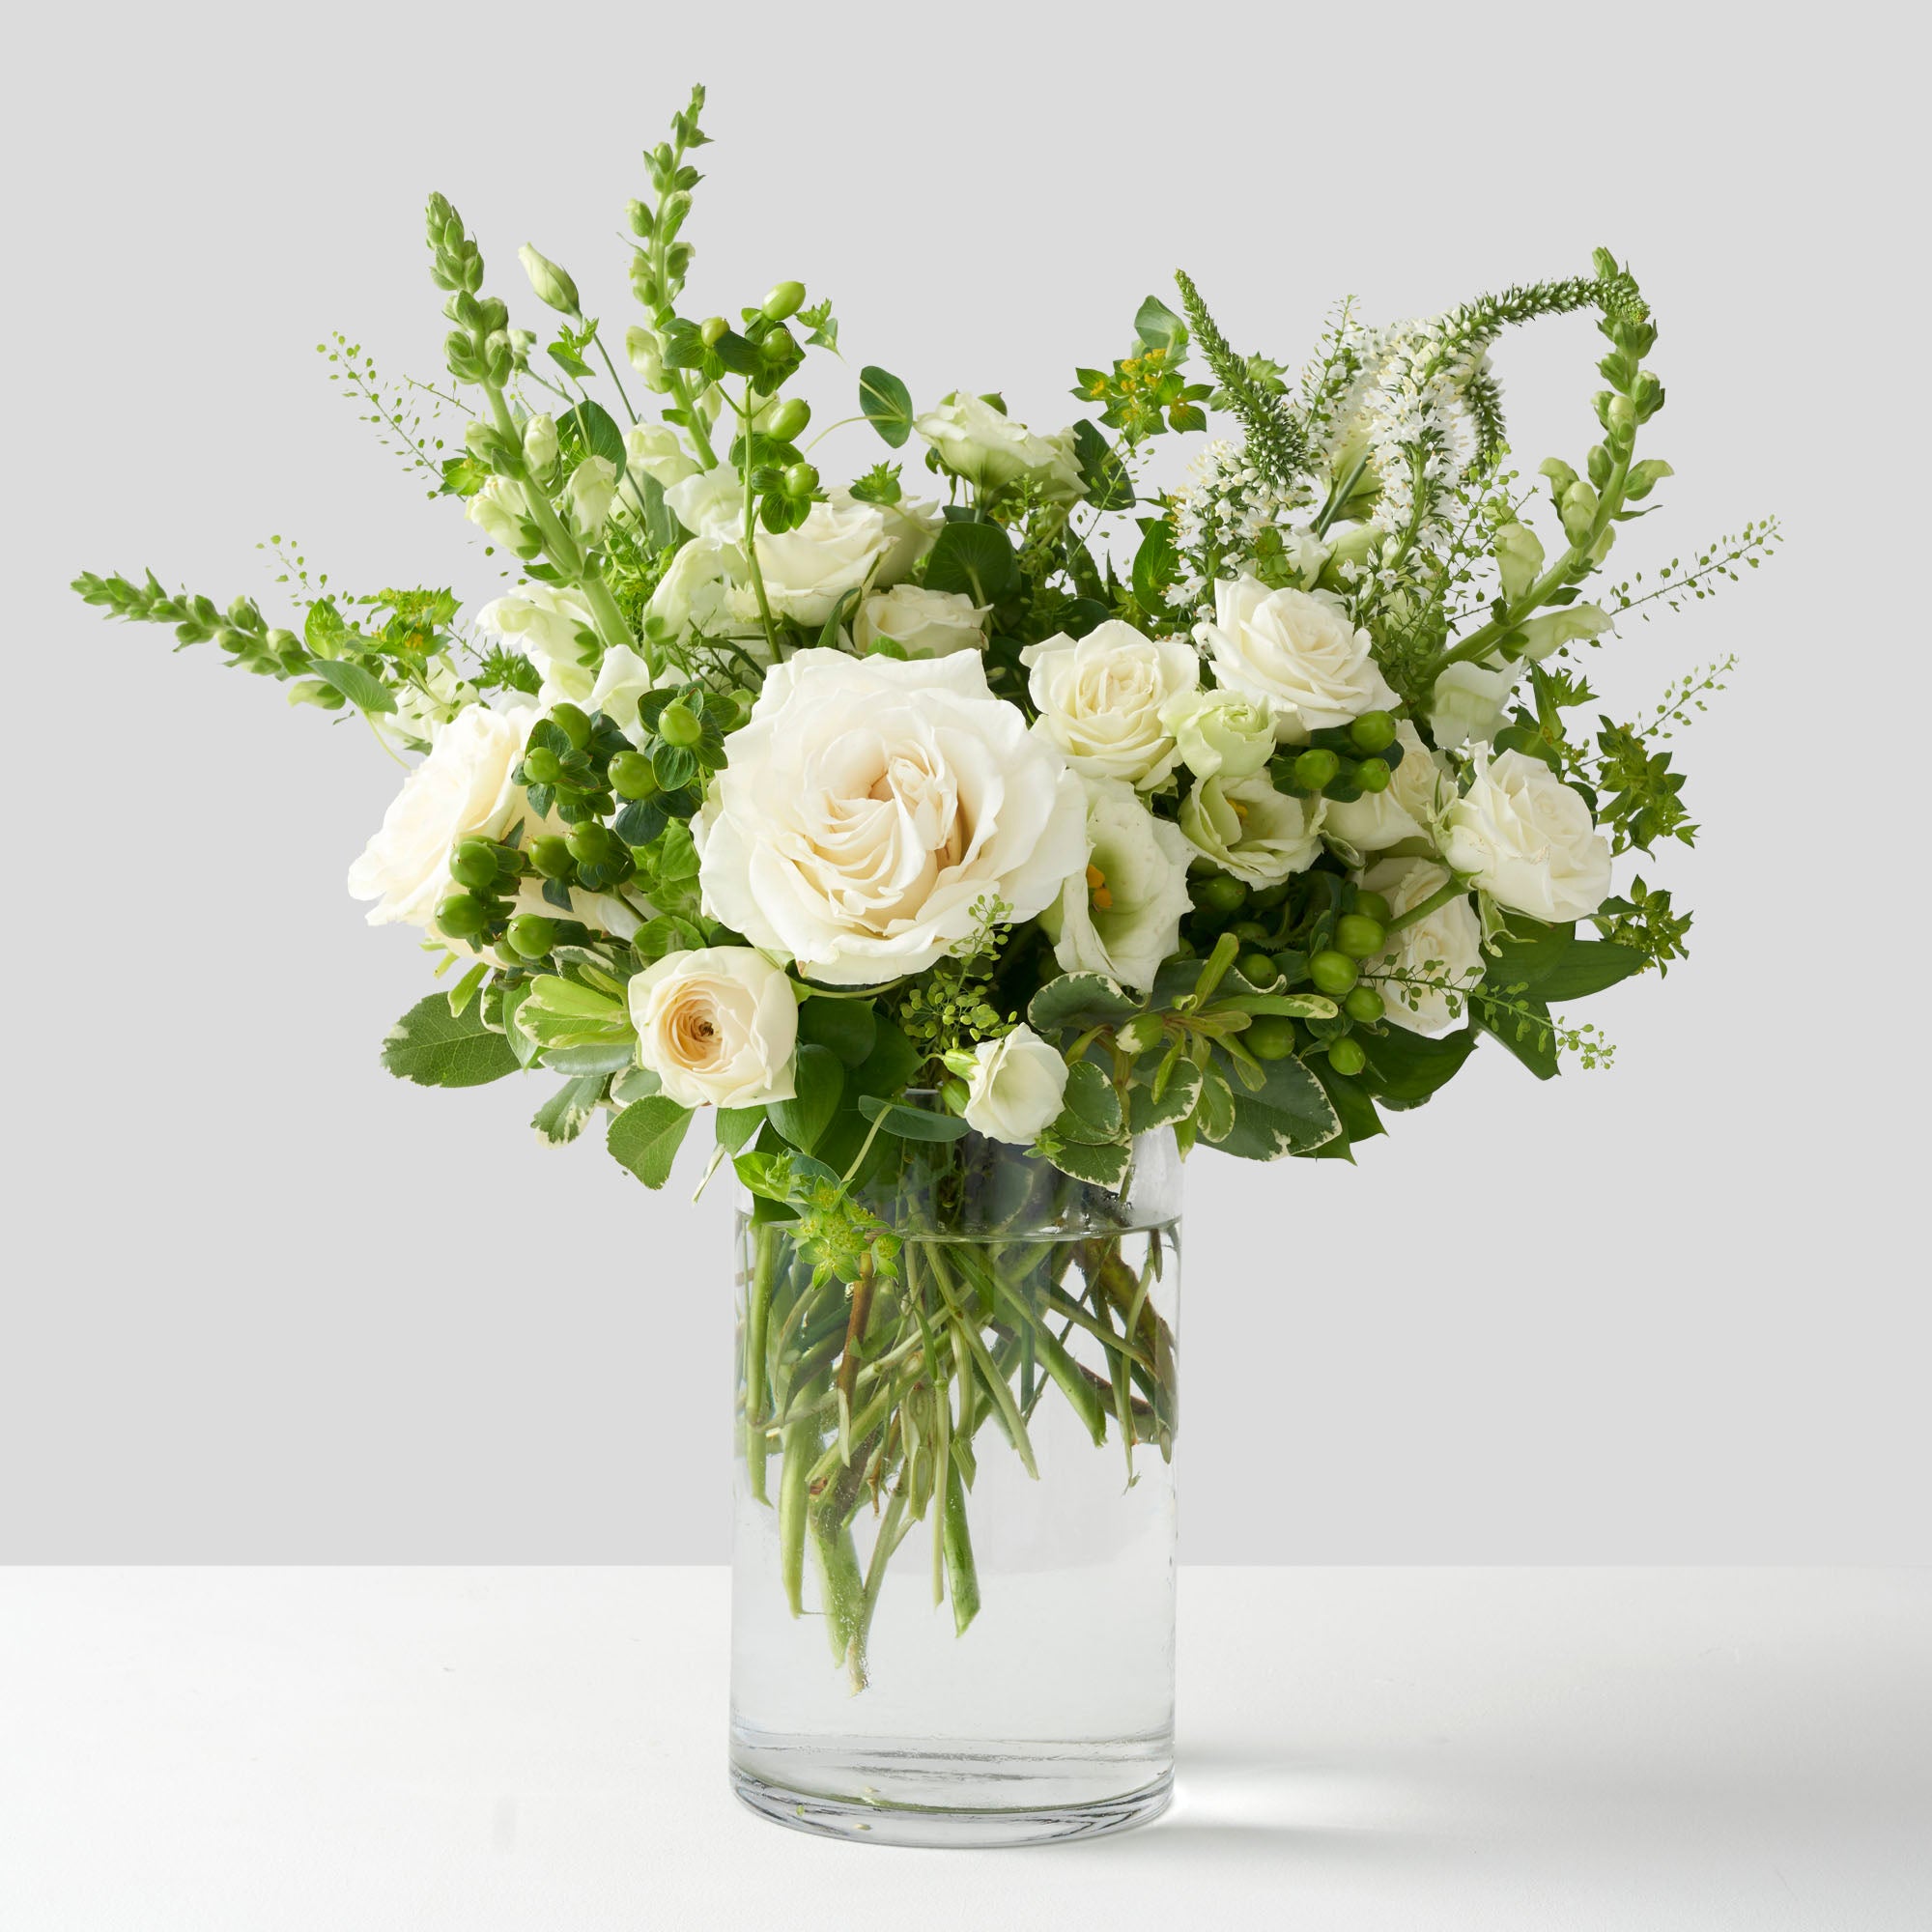 All green and white, lose, airy, flower arrangement, in class vase on white background.